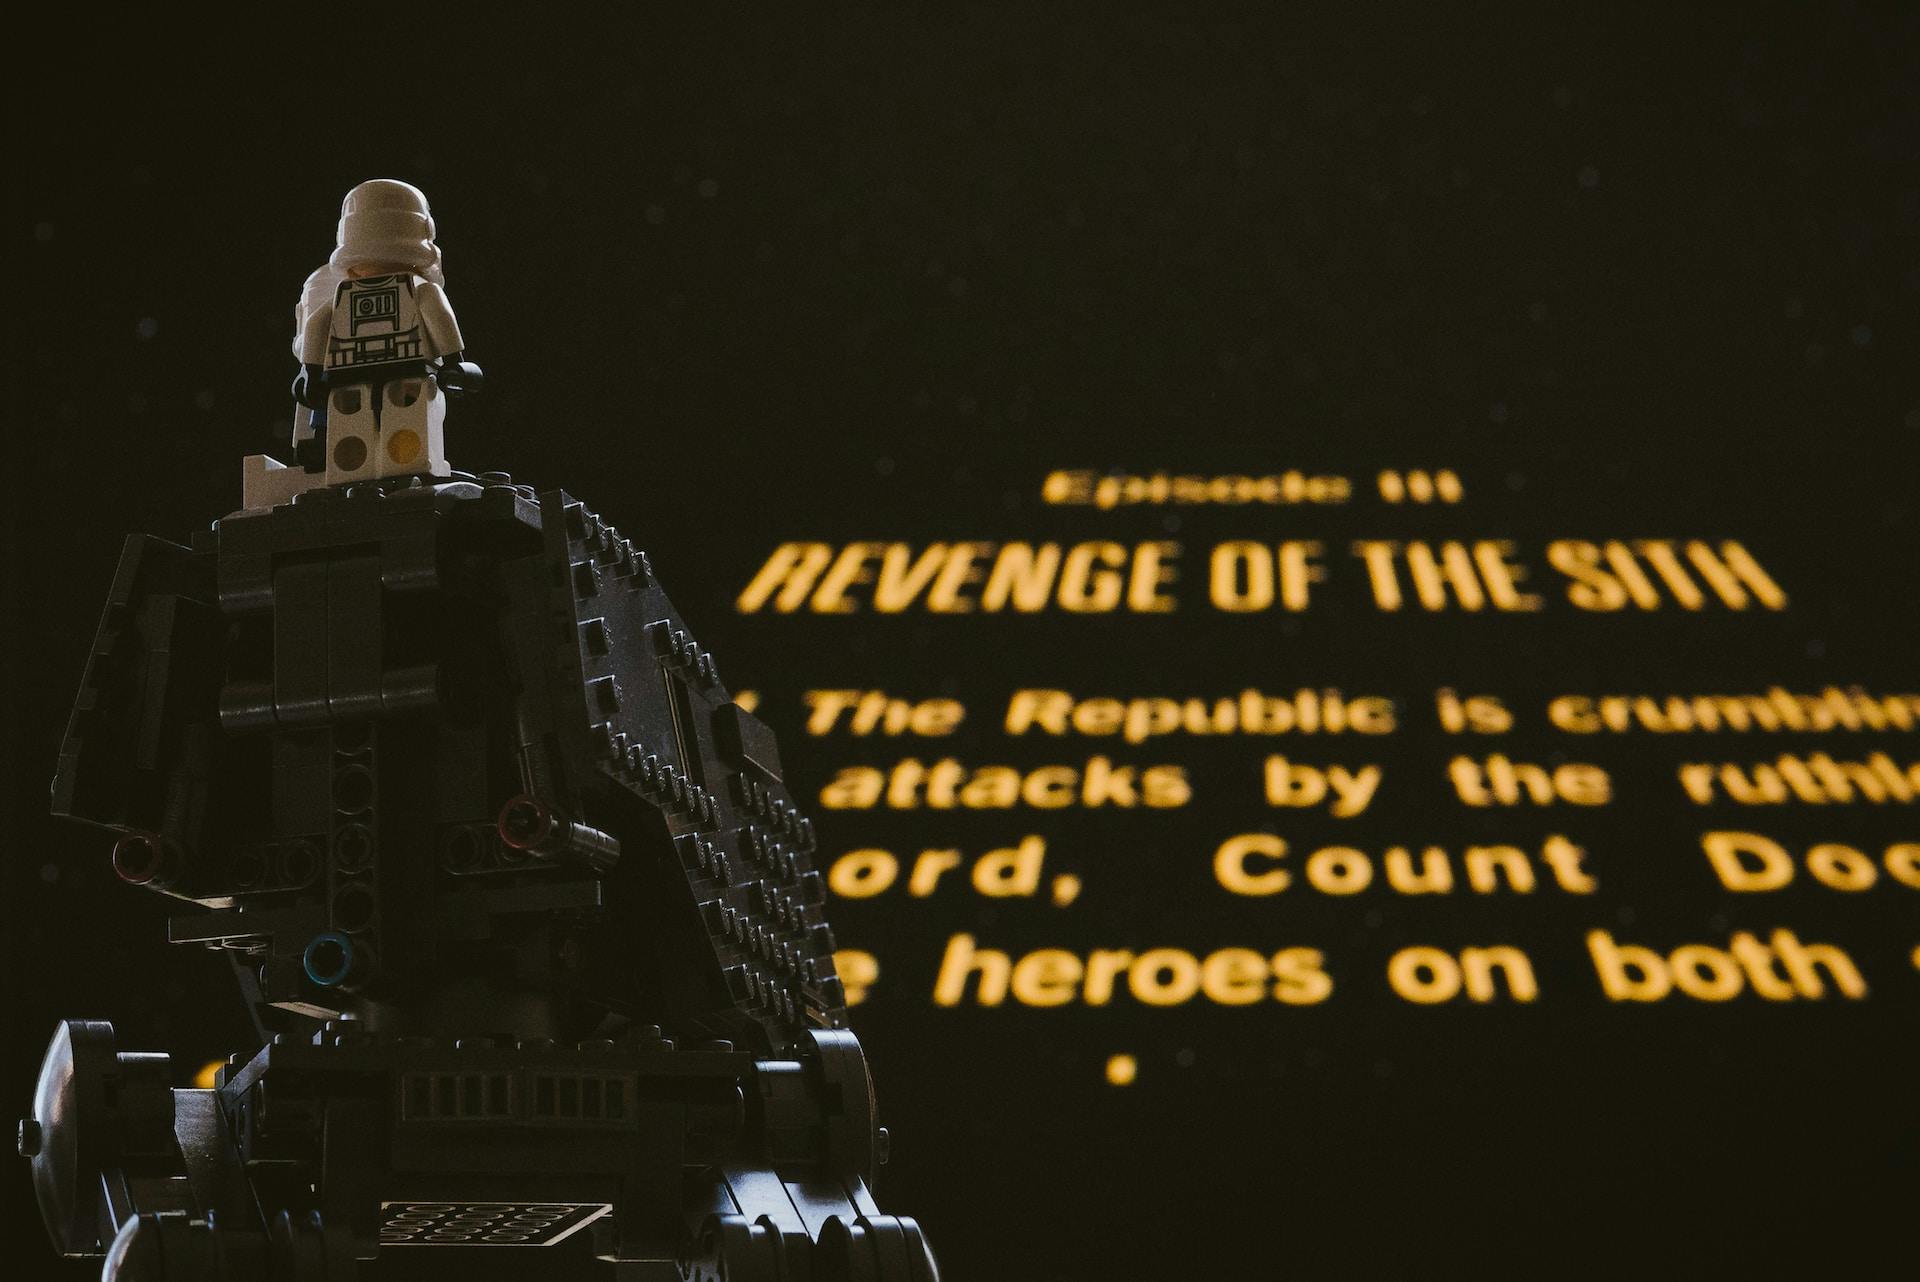 Lego Storm Trooper watching the opening credits of a movie